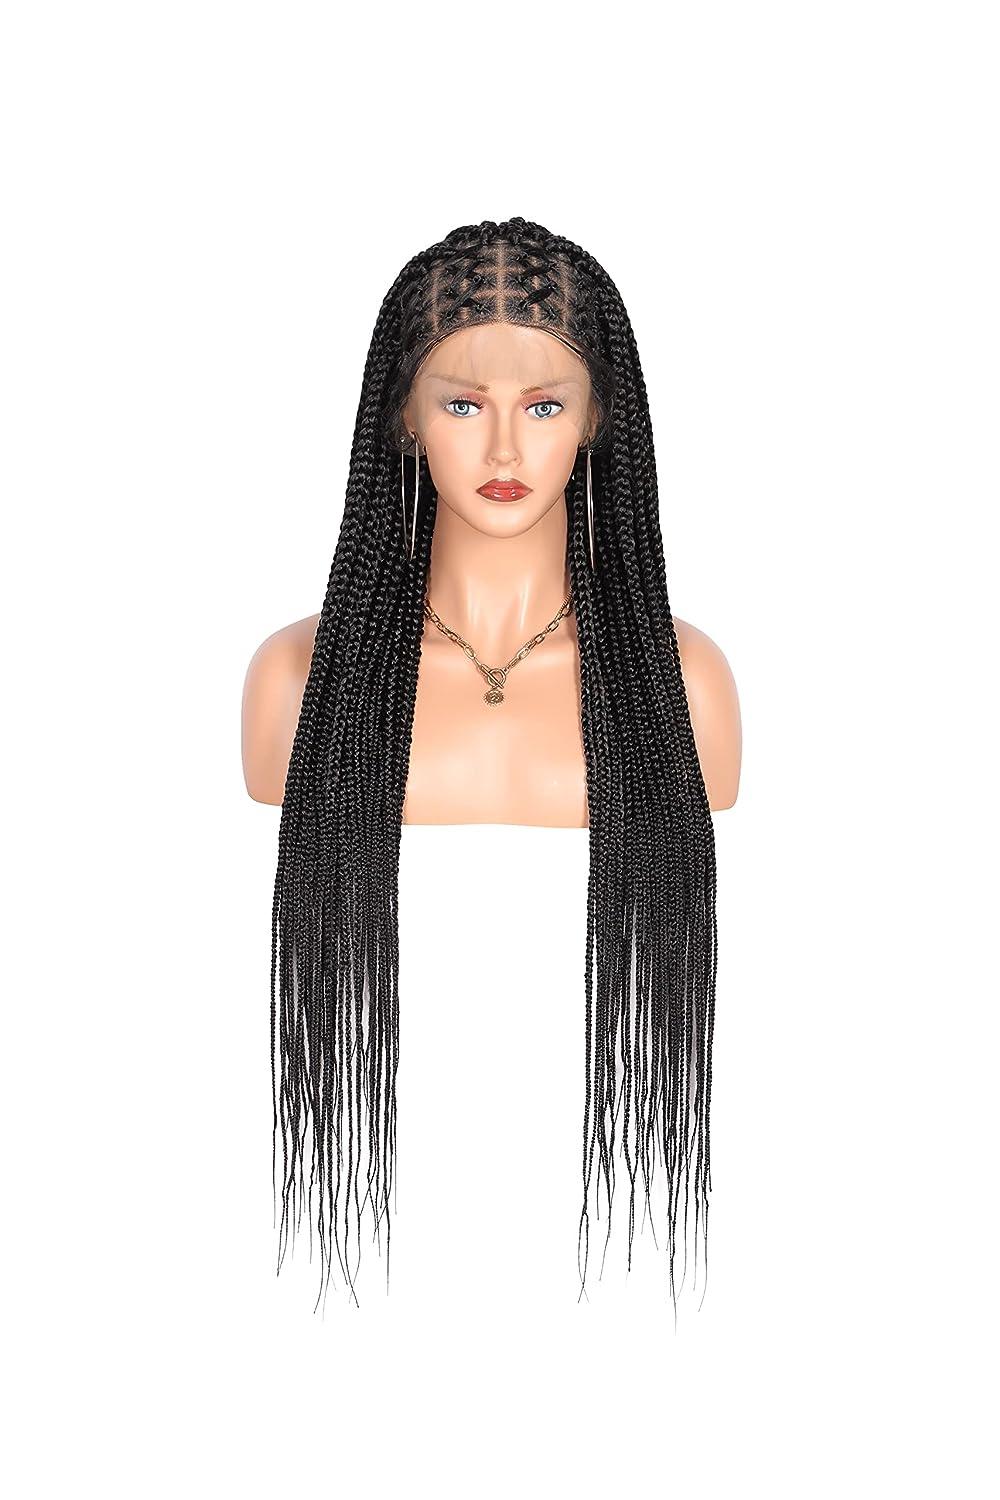  Fecihor Criss Cross Knotless Box Braided Wigs with Baby Hair  36 Cornrow Lace Front Braids Wigs for Women Embroidery Full Double Lace  Burgundy Braid Wig : Beauty & Personal Care